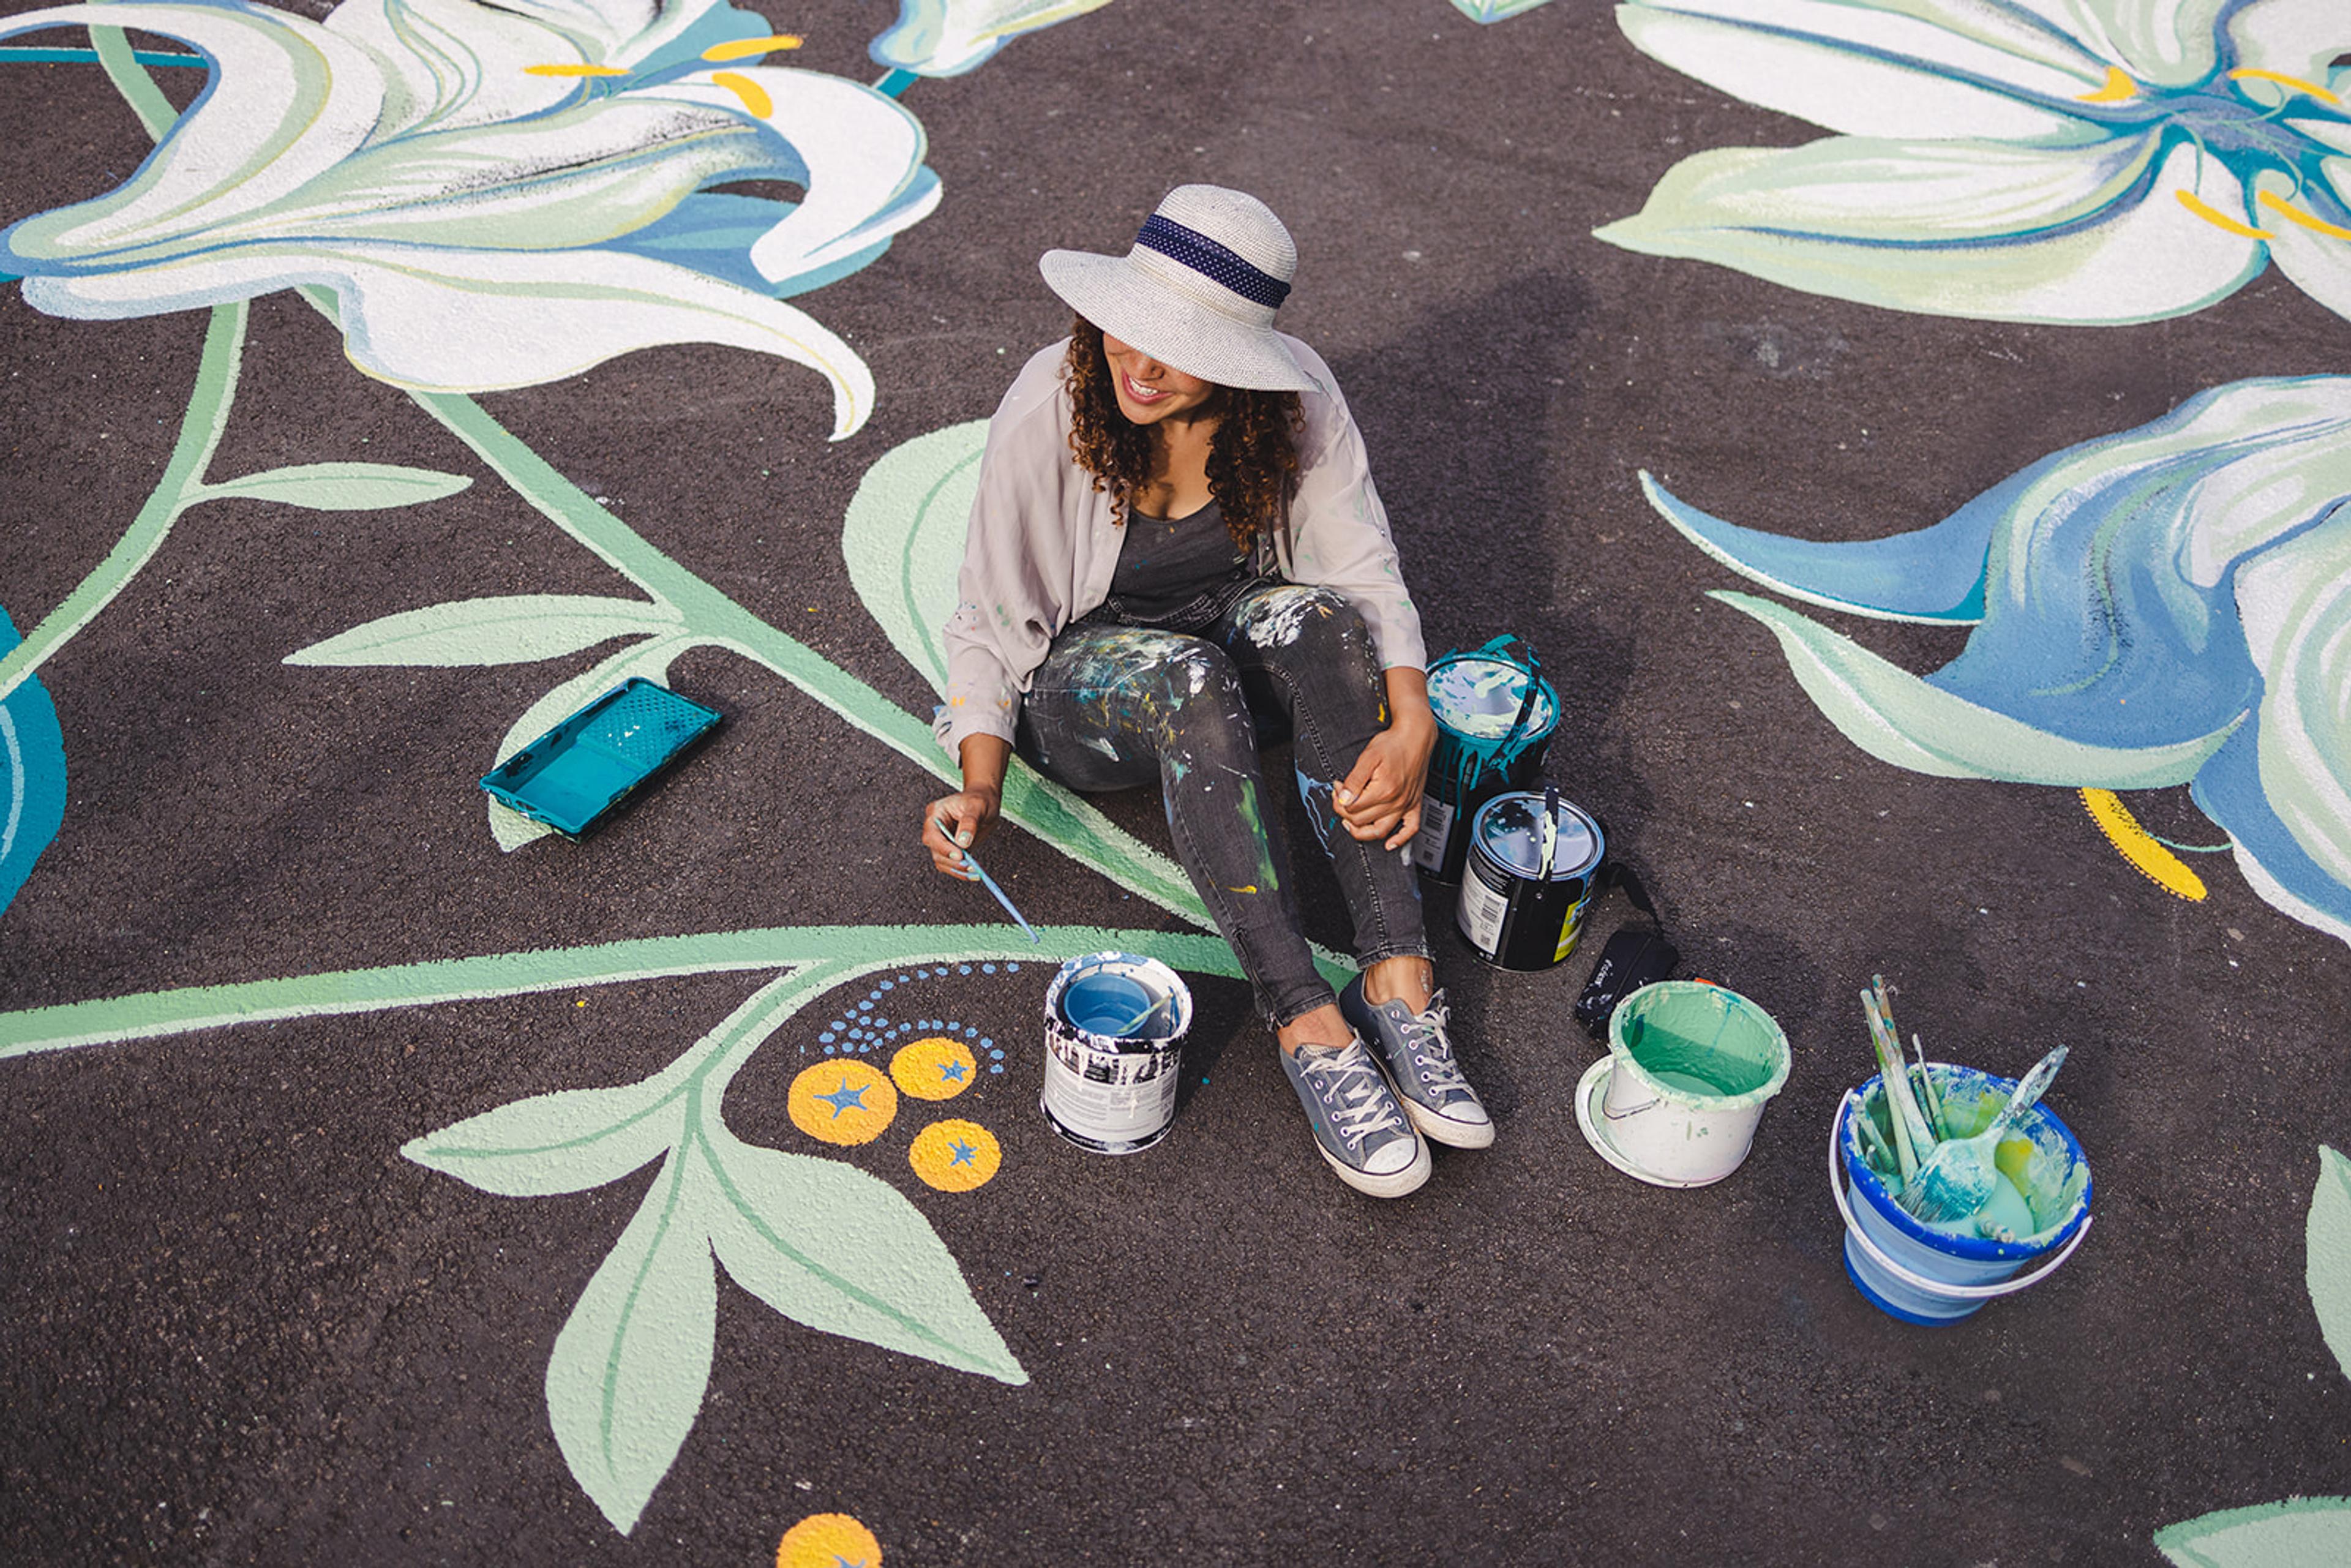 Photograph of person sitting on a street painting beautiful flowers and leaves all over the ground.